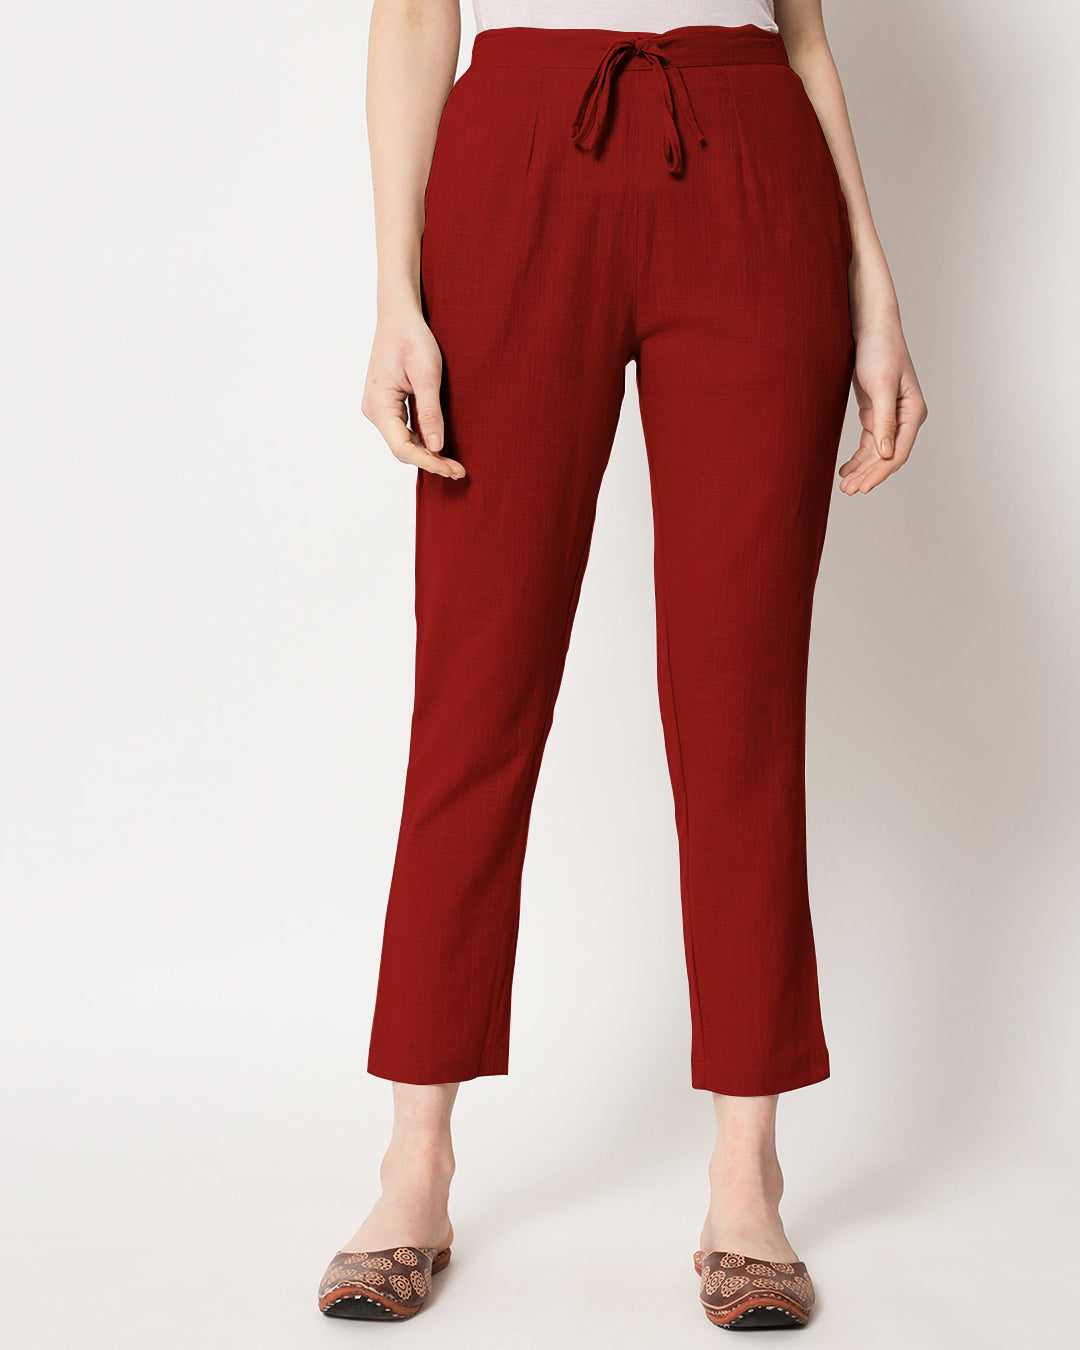 Combo: White & Classic Red Cigarette Pants- Set of 2